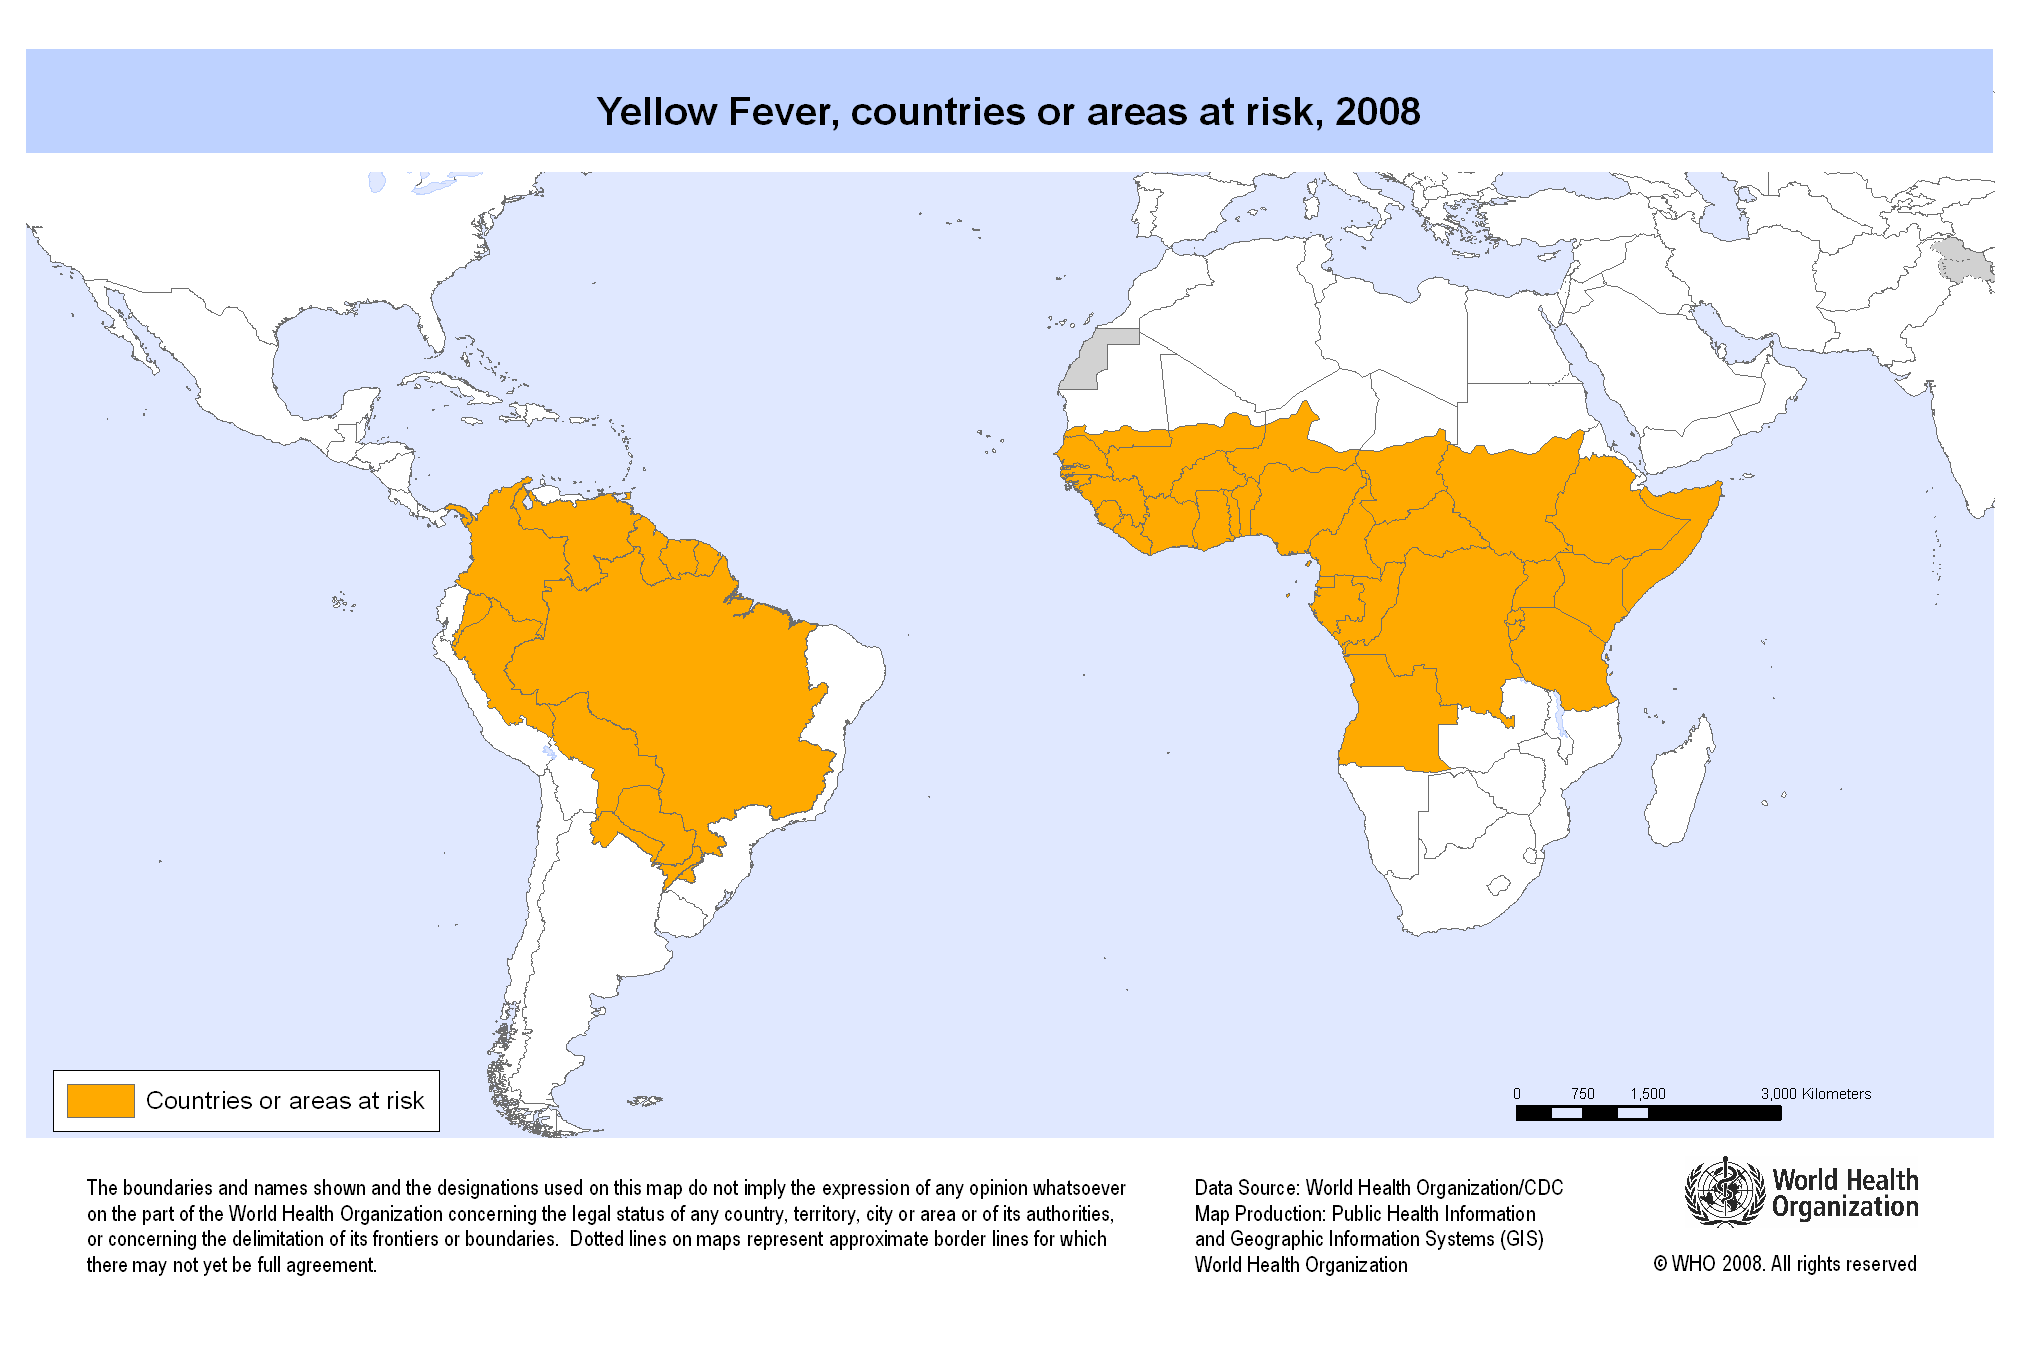 Areas of risk for Yellow fever